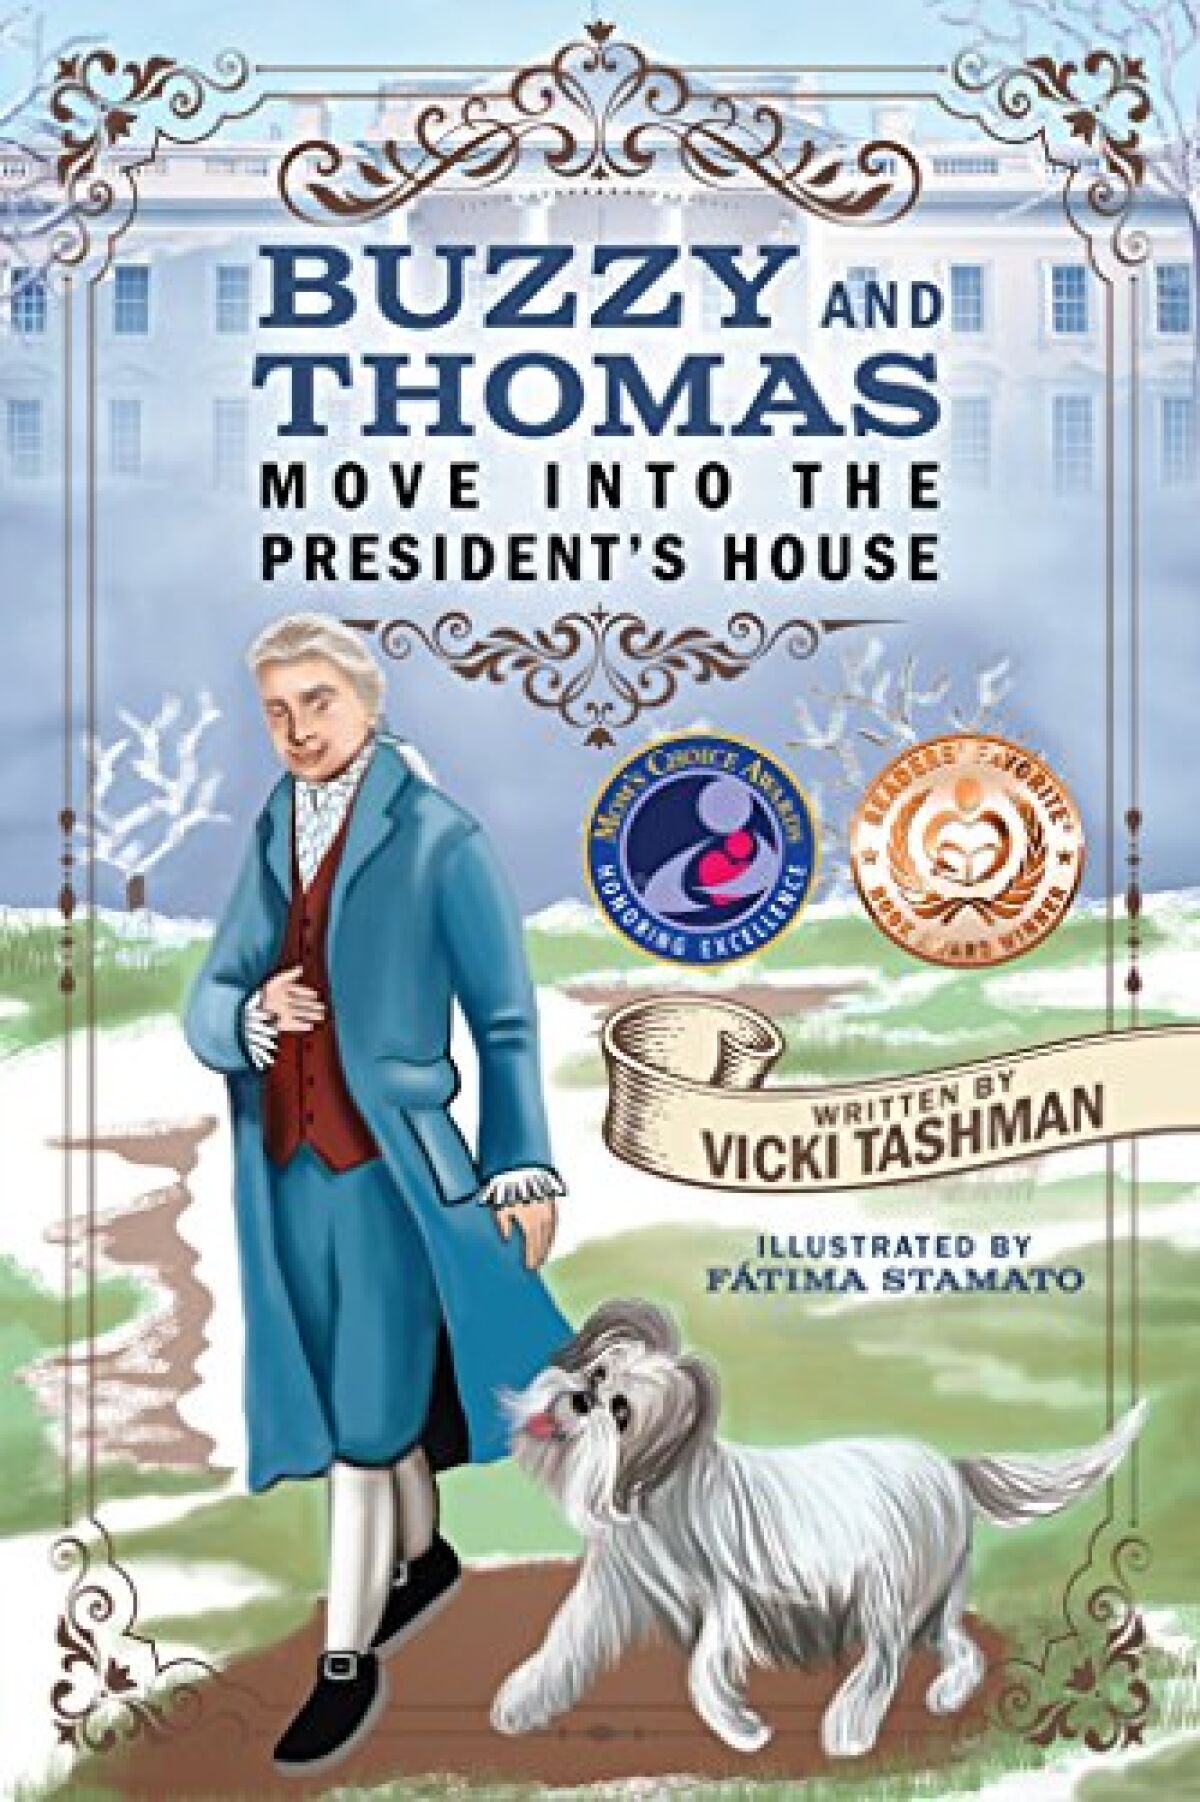 The cover of "Buzzy and Thomas Move into the President's House"